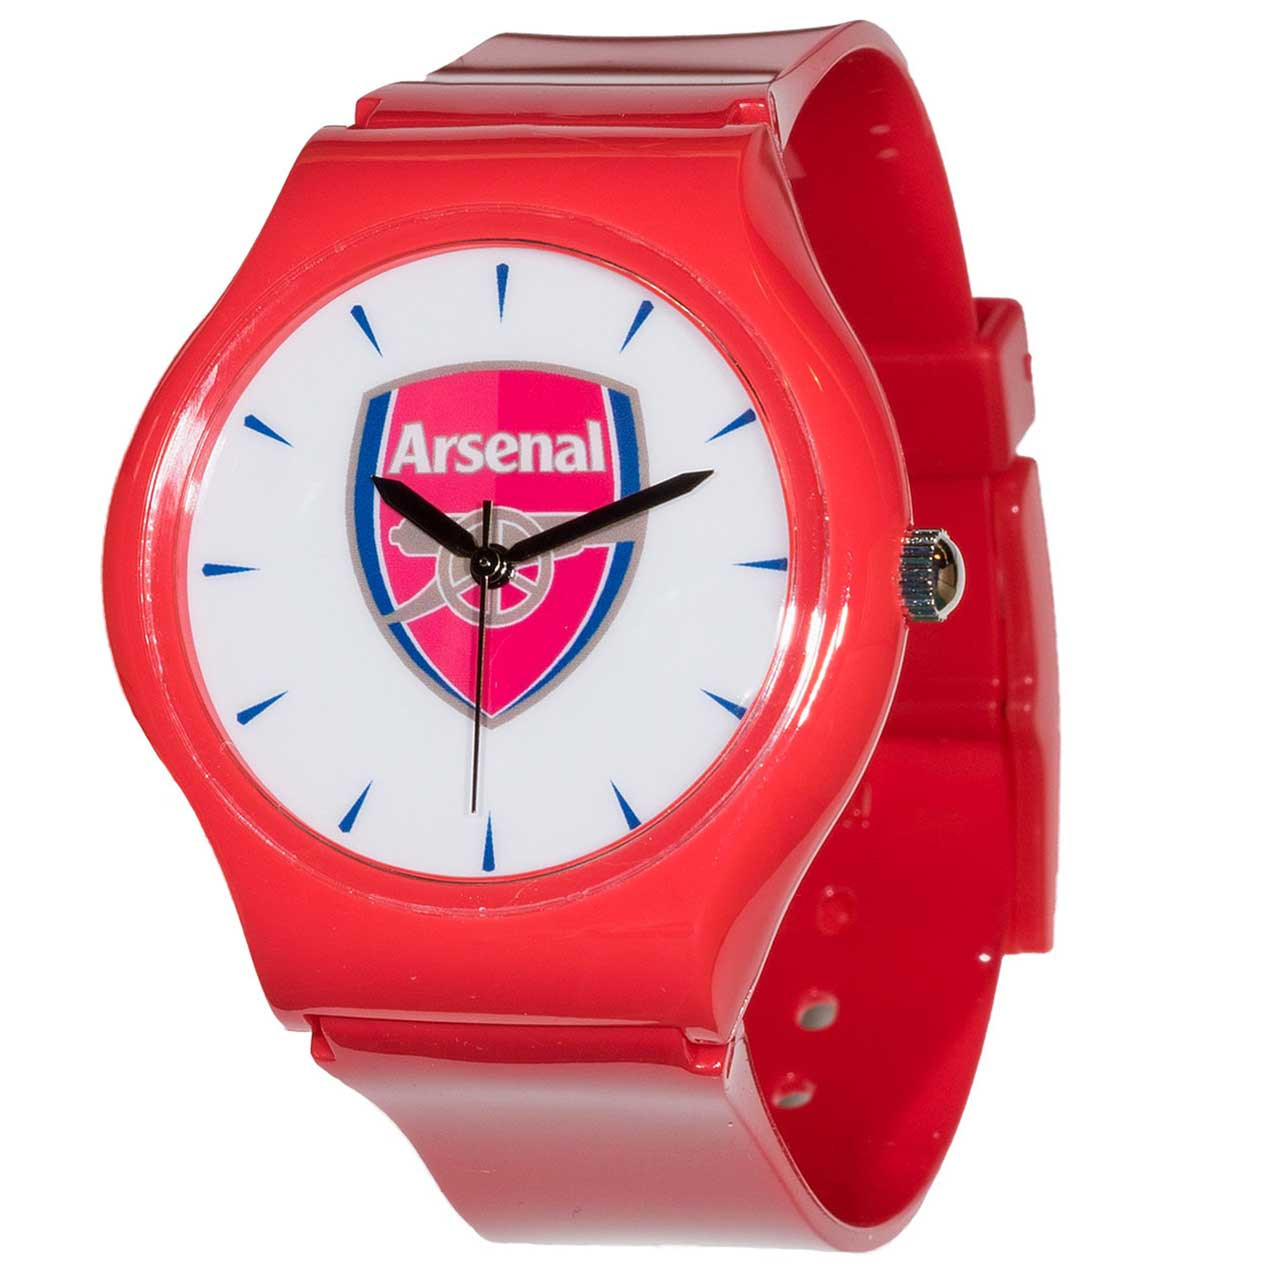 38mm Arsenal FC Red Licensed Team Watch with Official Arsenal Crest